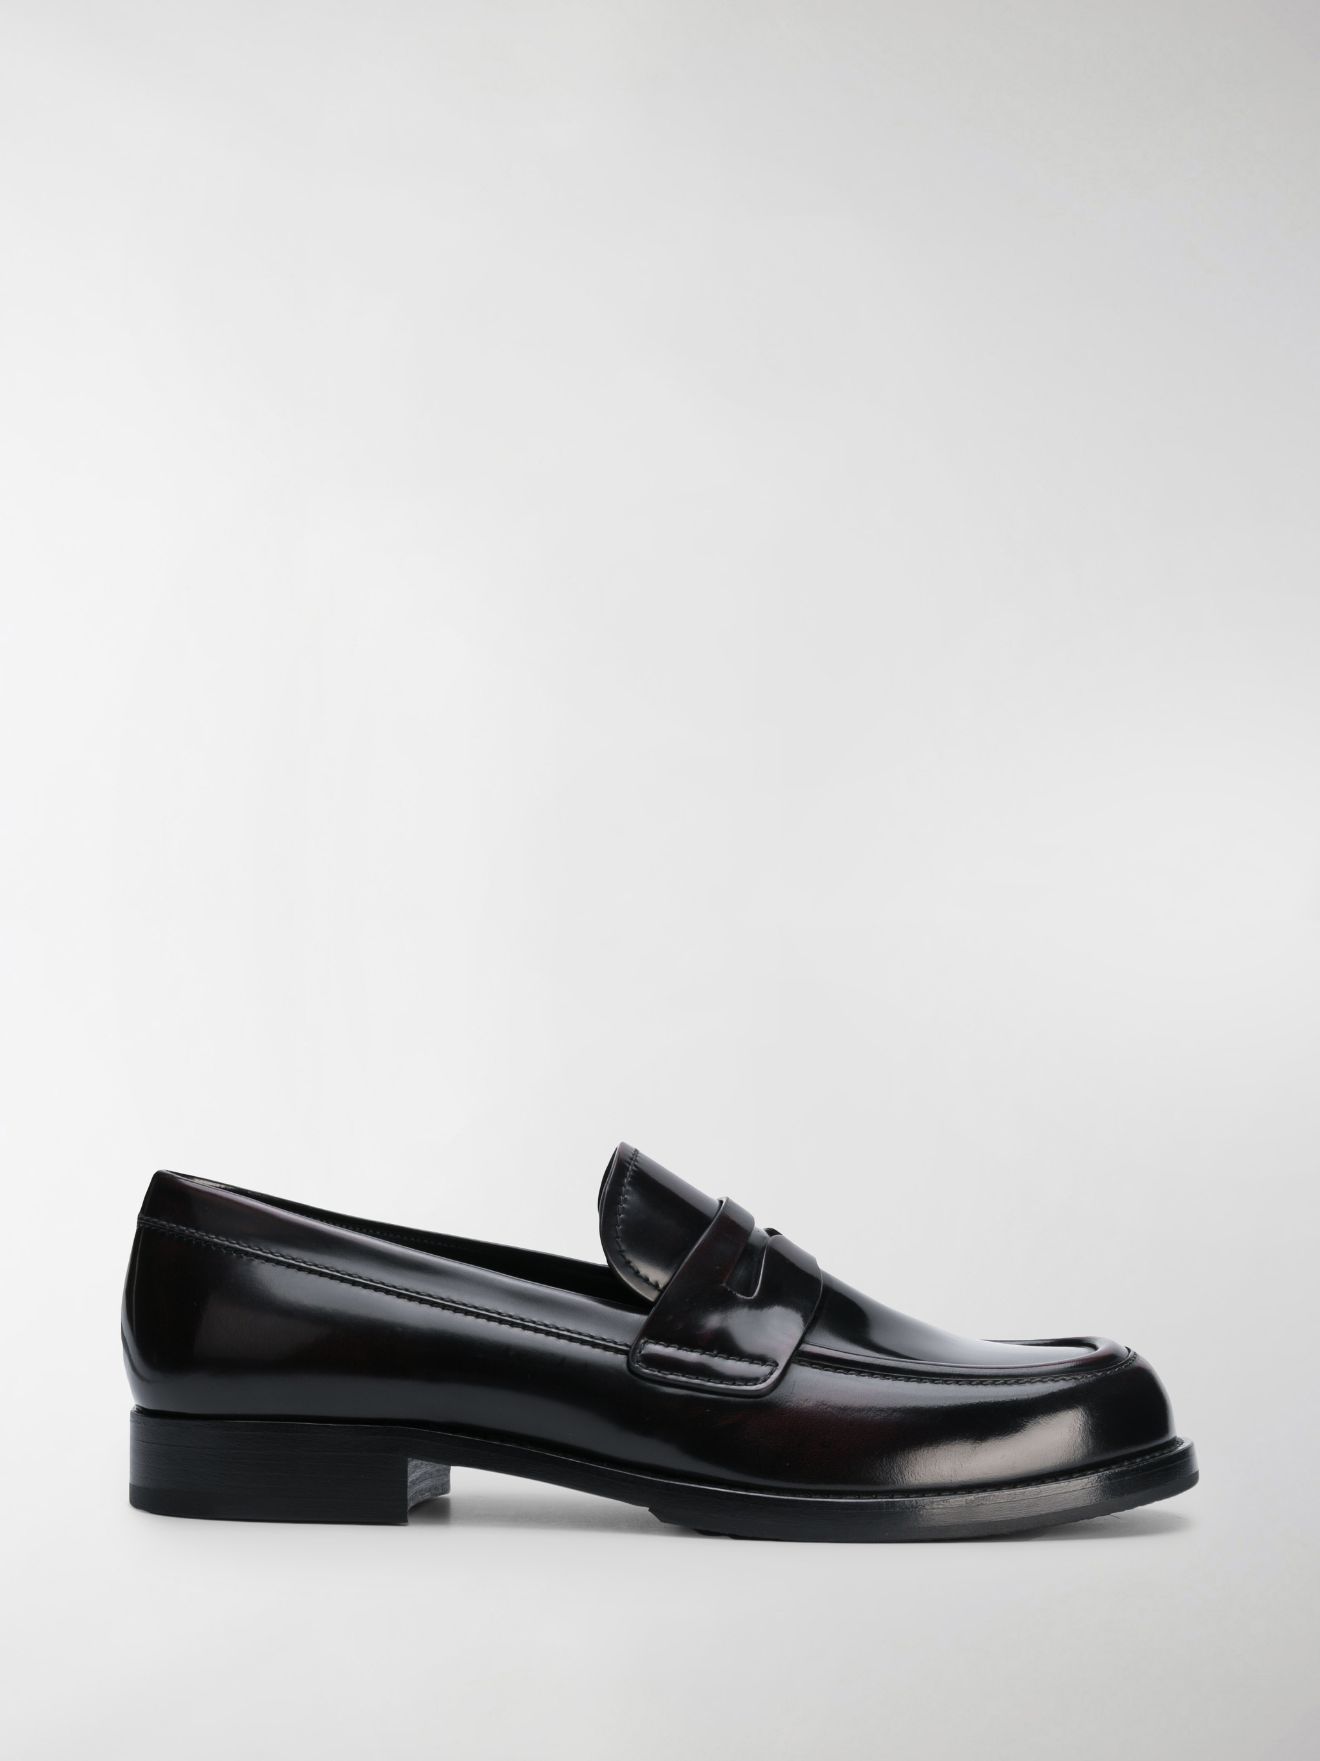 Prada classic penny loafers red | MODES